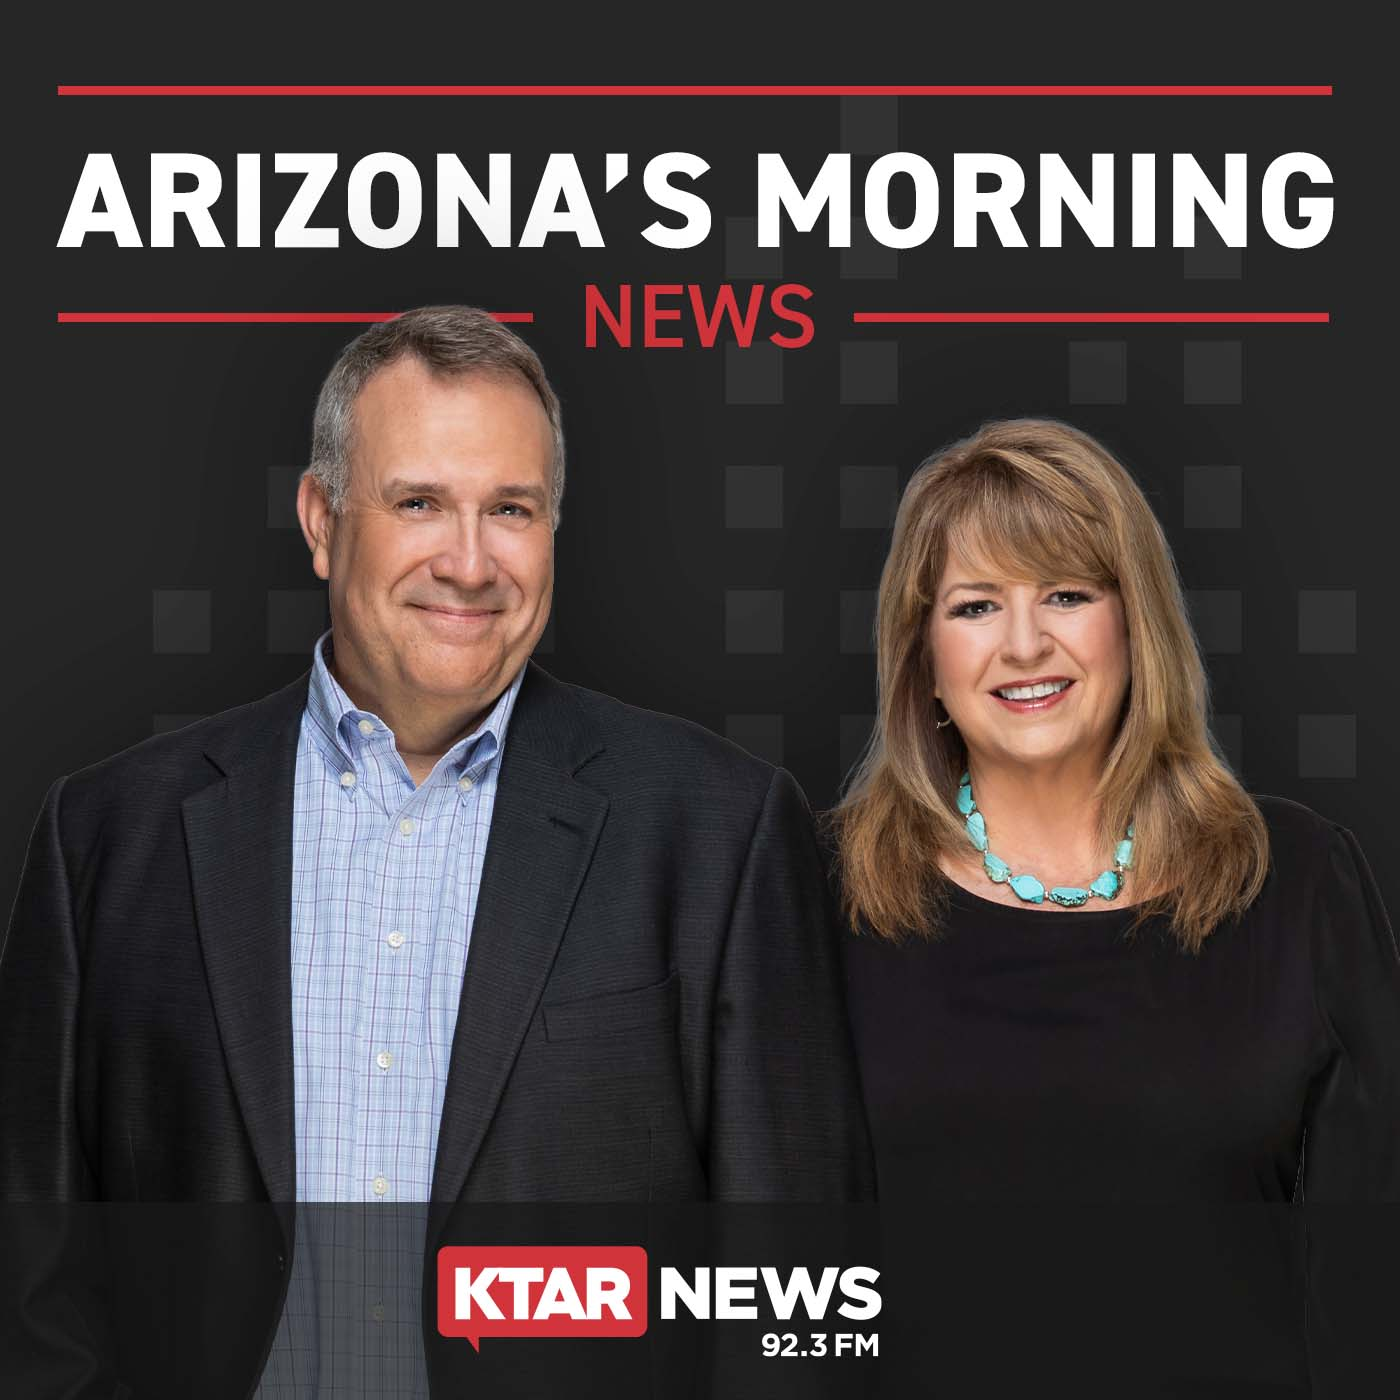 Sharper Point Commentary - The race to be Arizona Governor